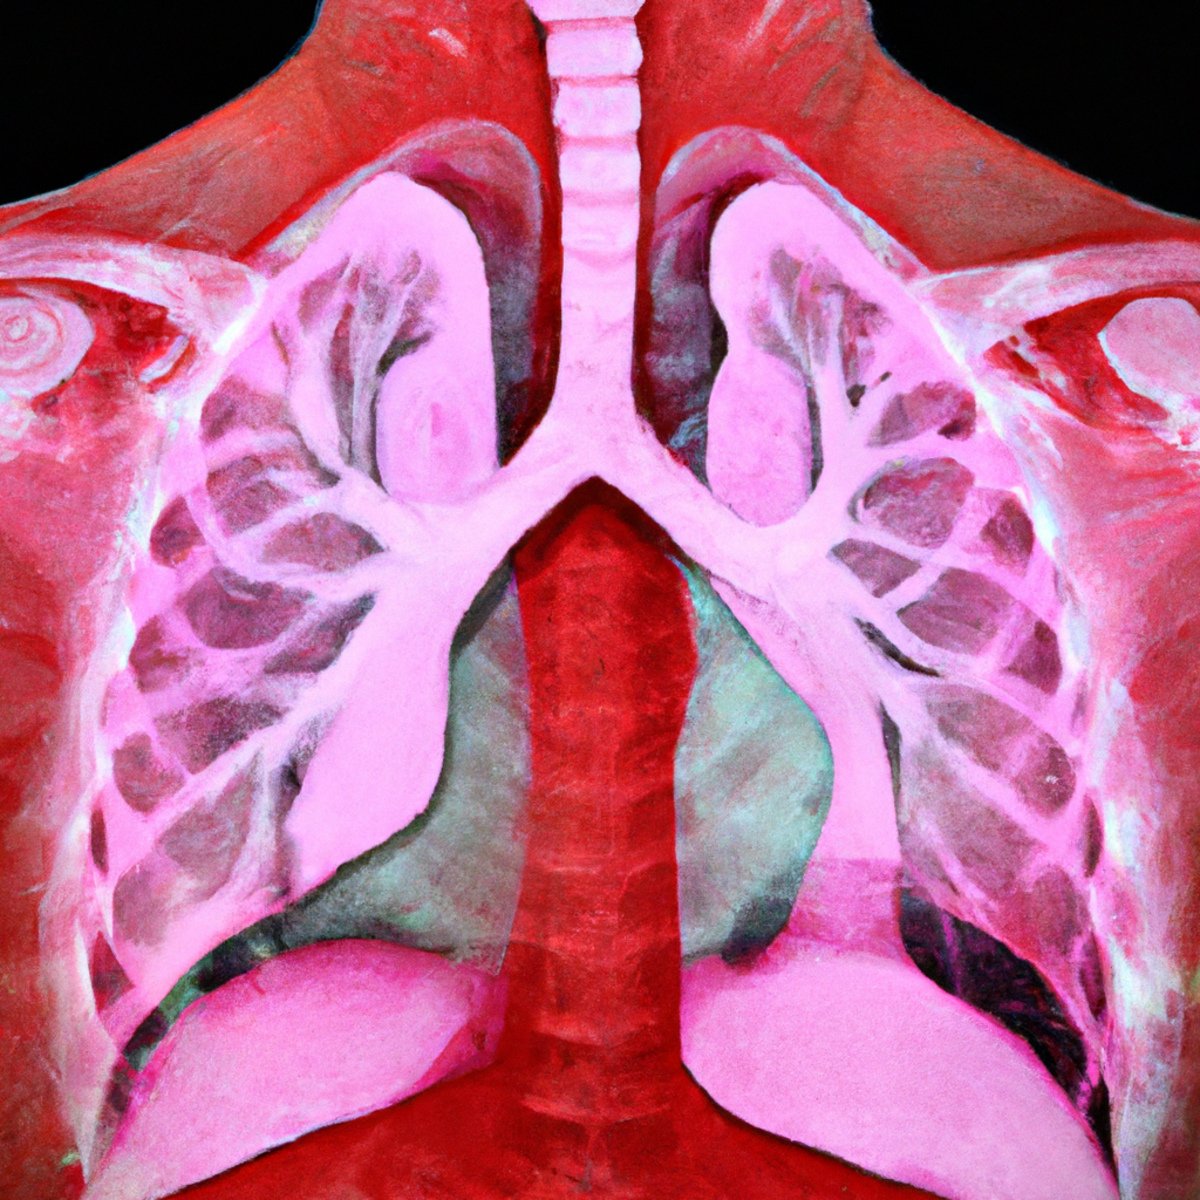 Close-up comparison of a healthy pink lung and a grey, Desquamative Interstitial Pneumonia (DIP) affected lung.